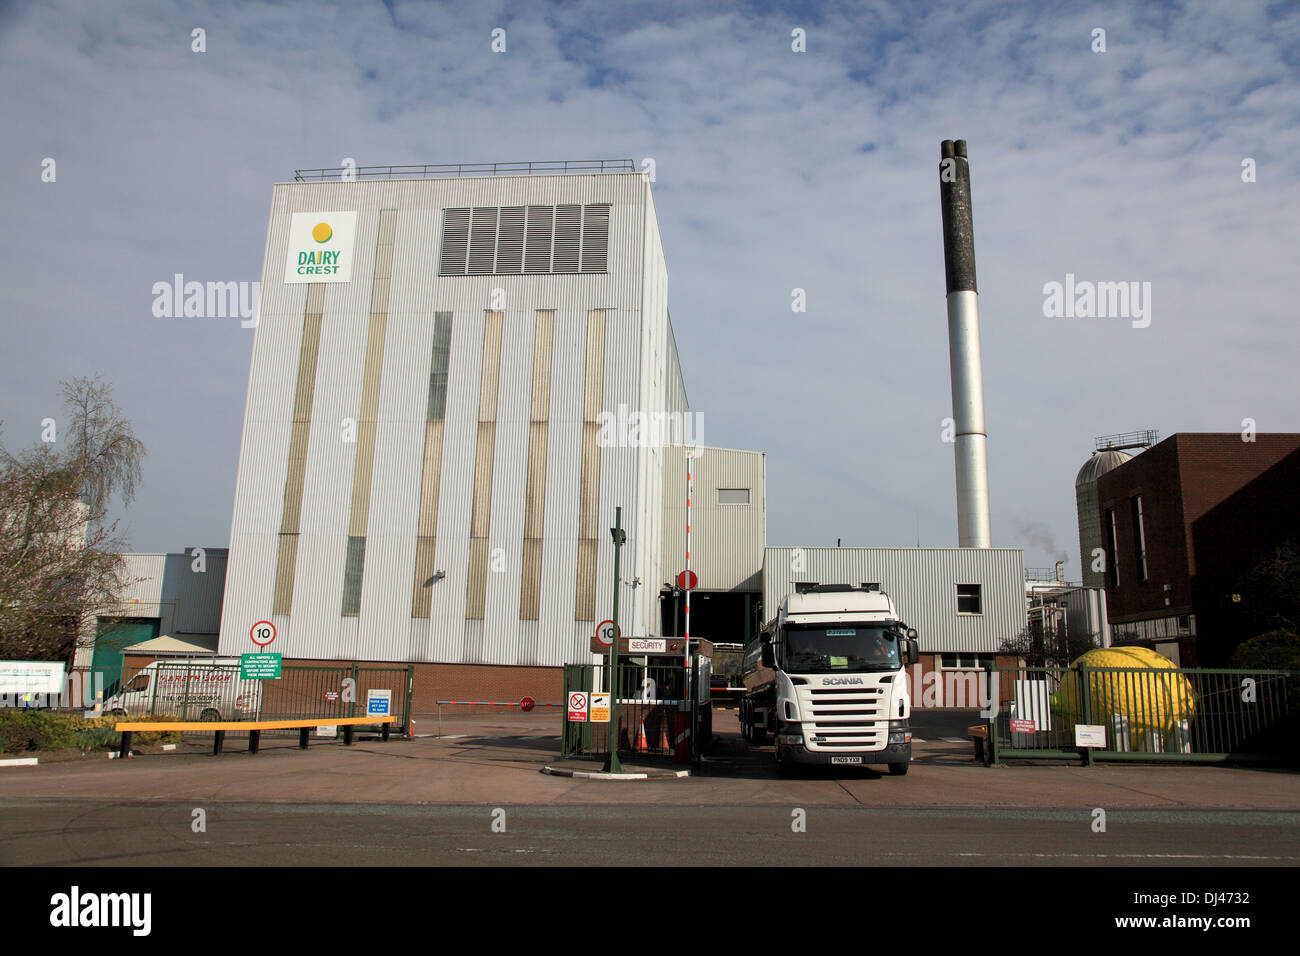 The Dairy Crest factory at Telford, Shropshire earmarked for closure Stock Photo